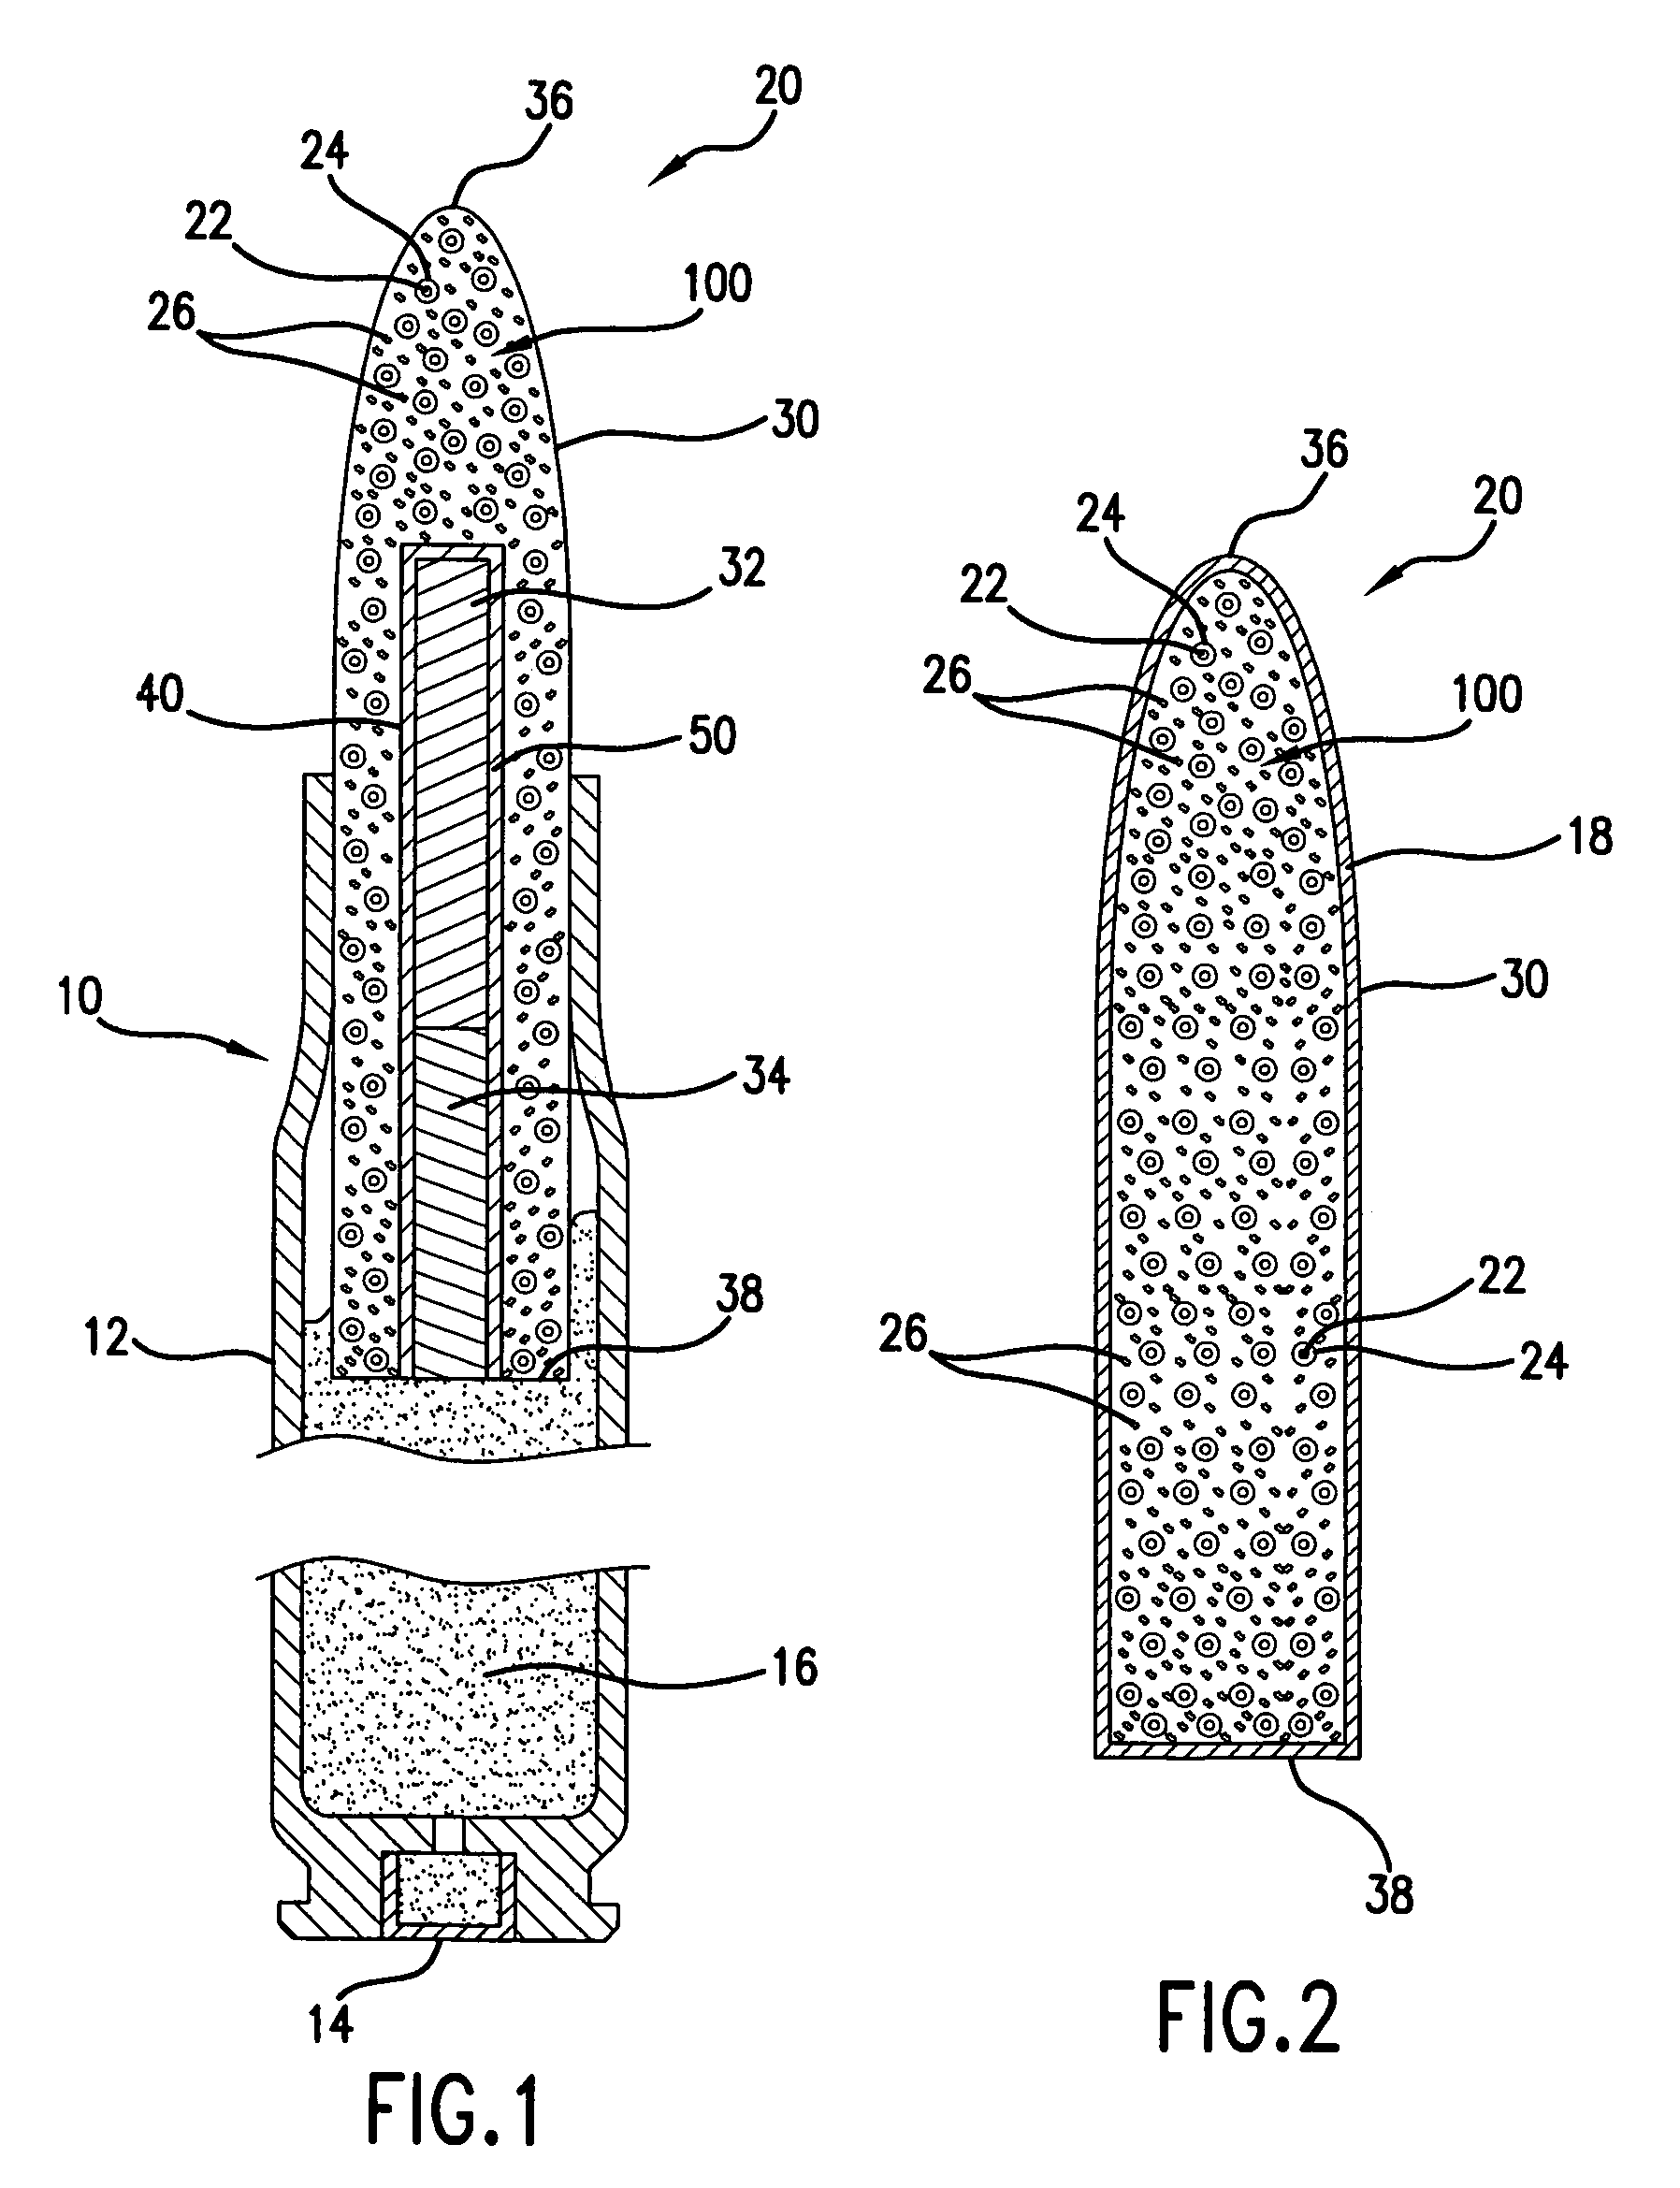 Method and apparatus for a projectile incorporating a metastable interstitial composite material